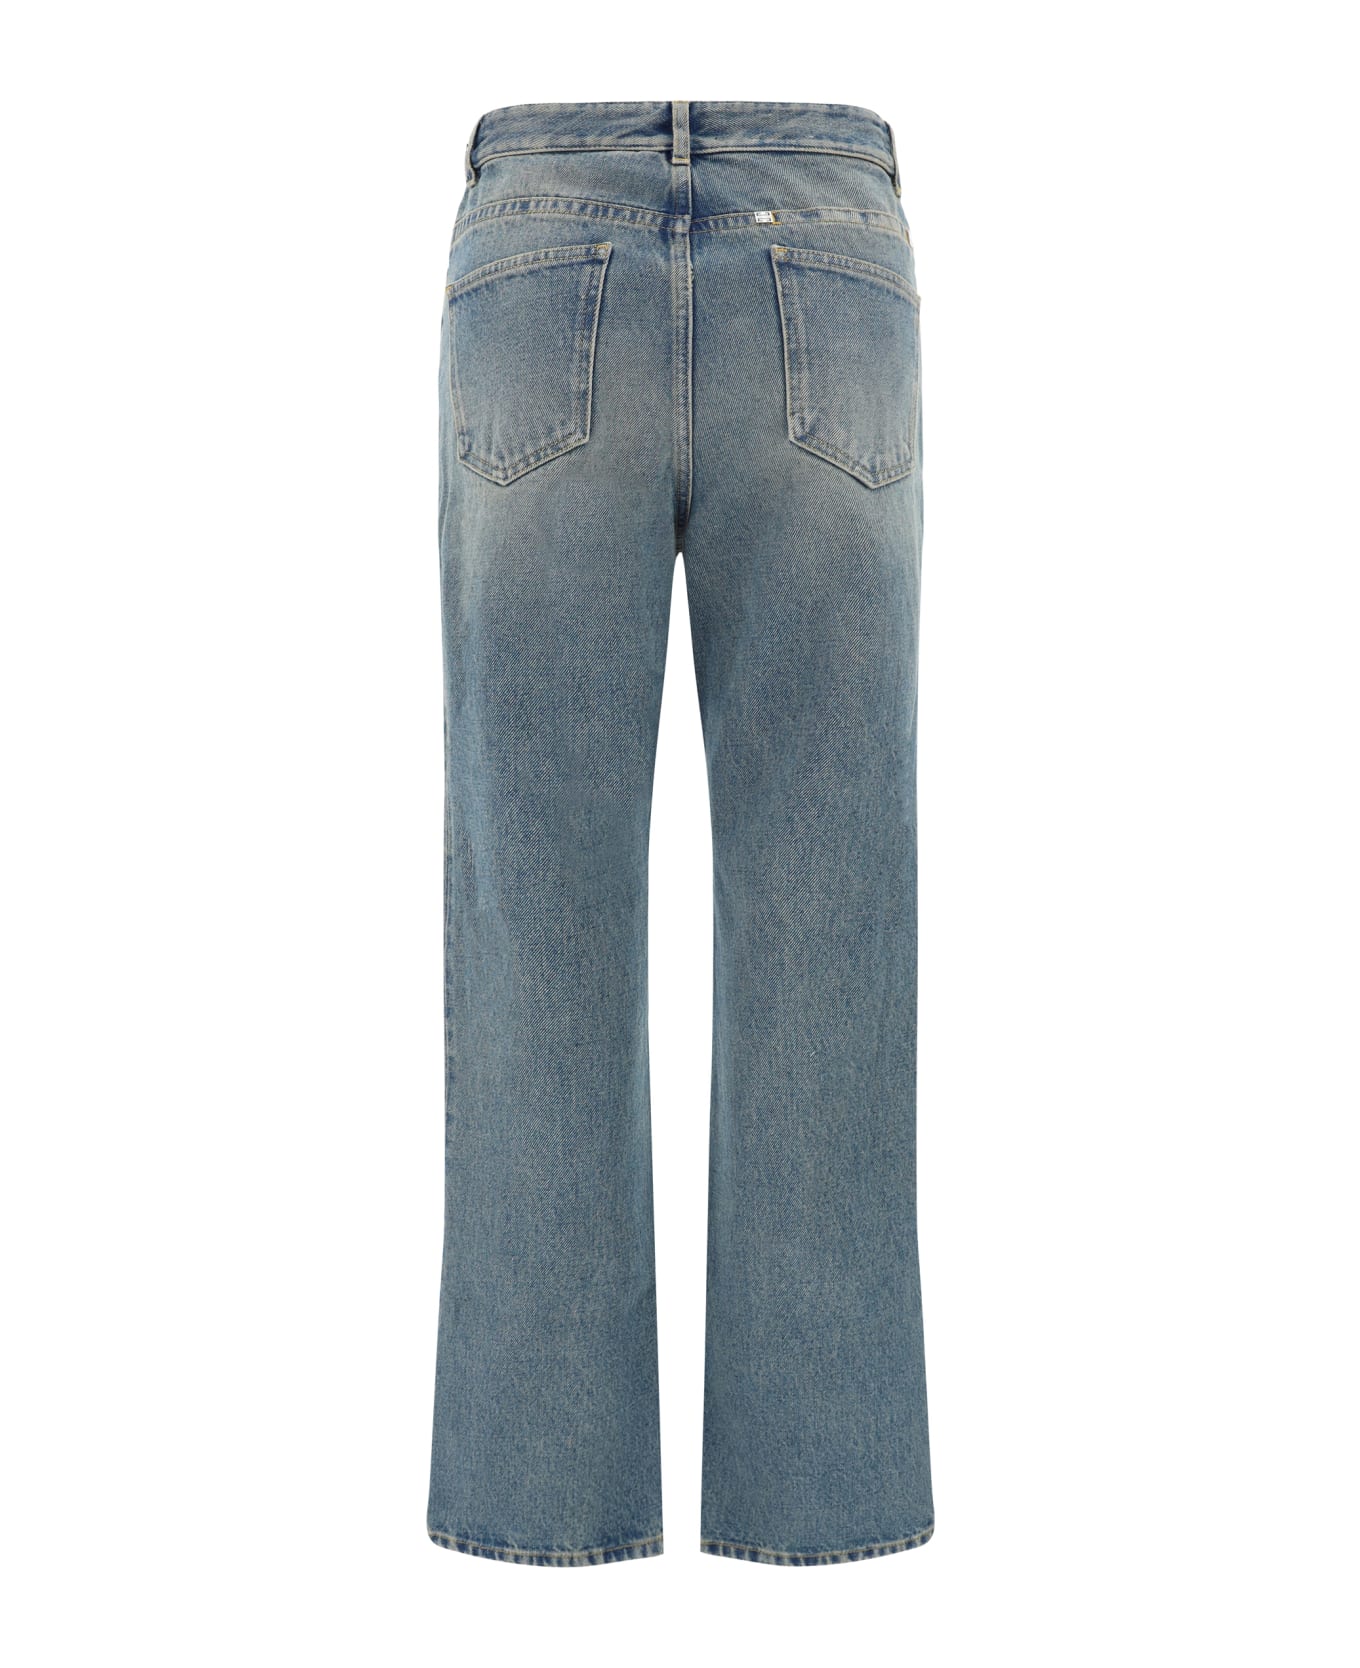 Givenchy Boot Cut Jeans - Blue デニム